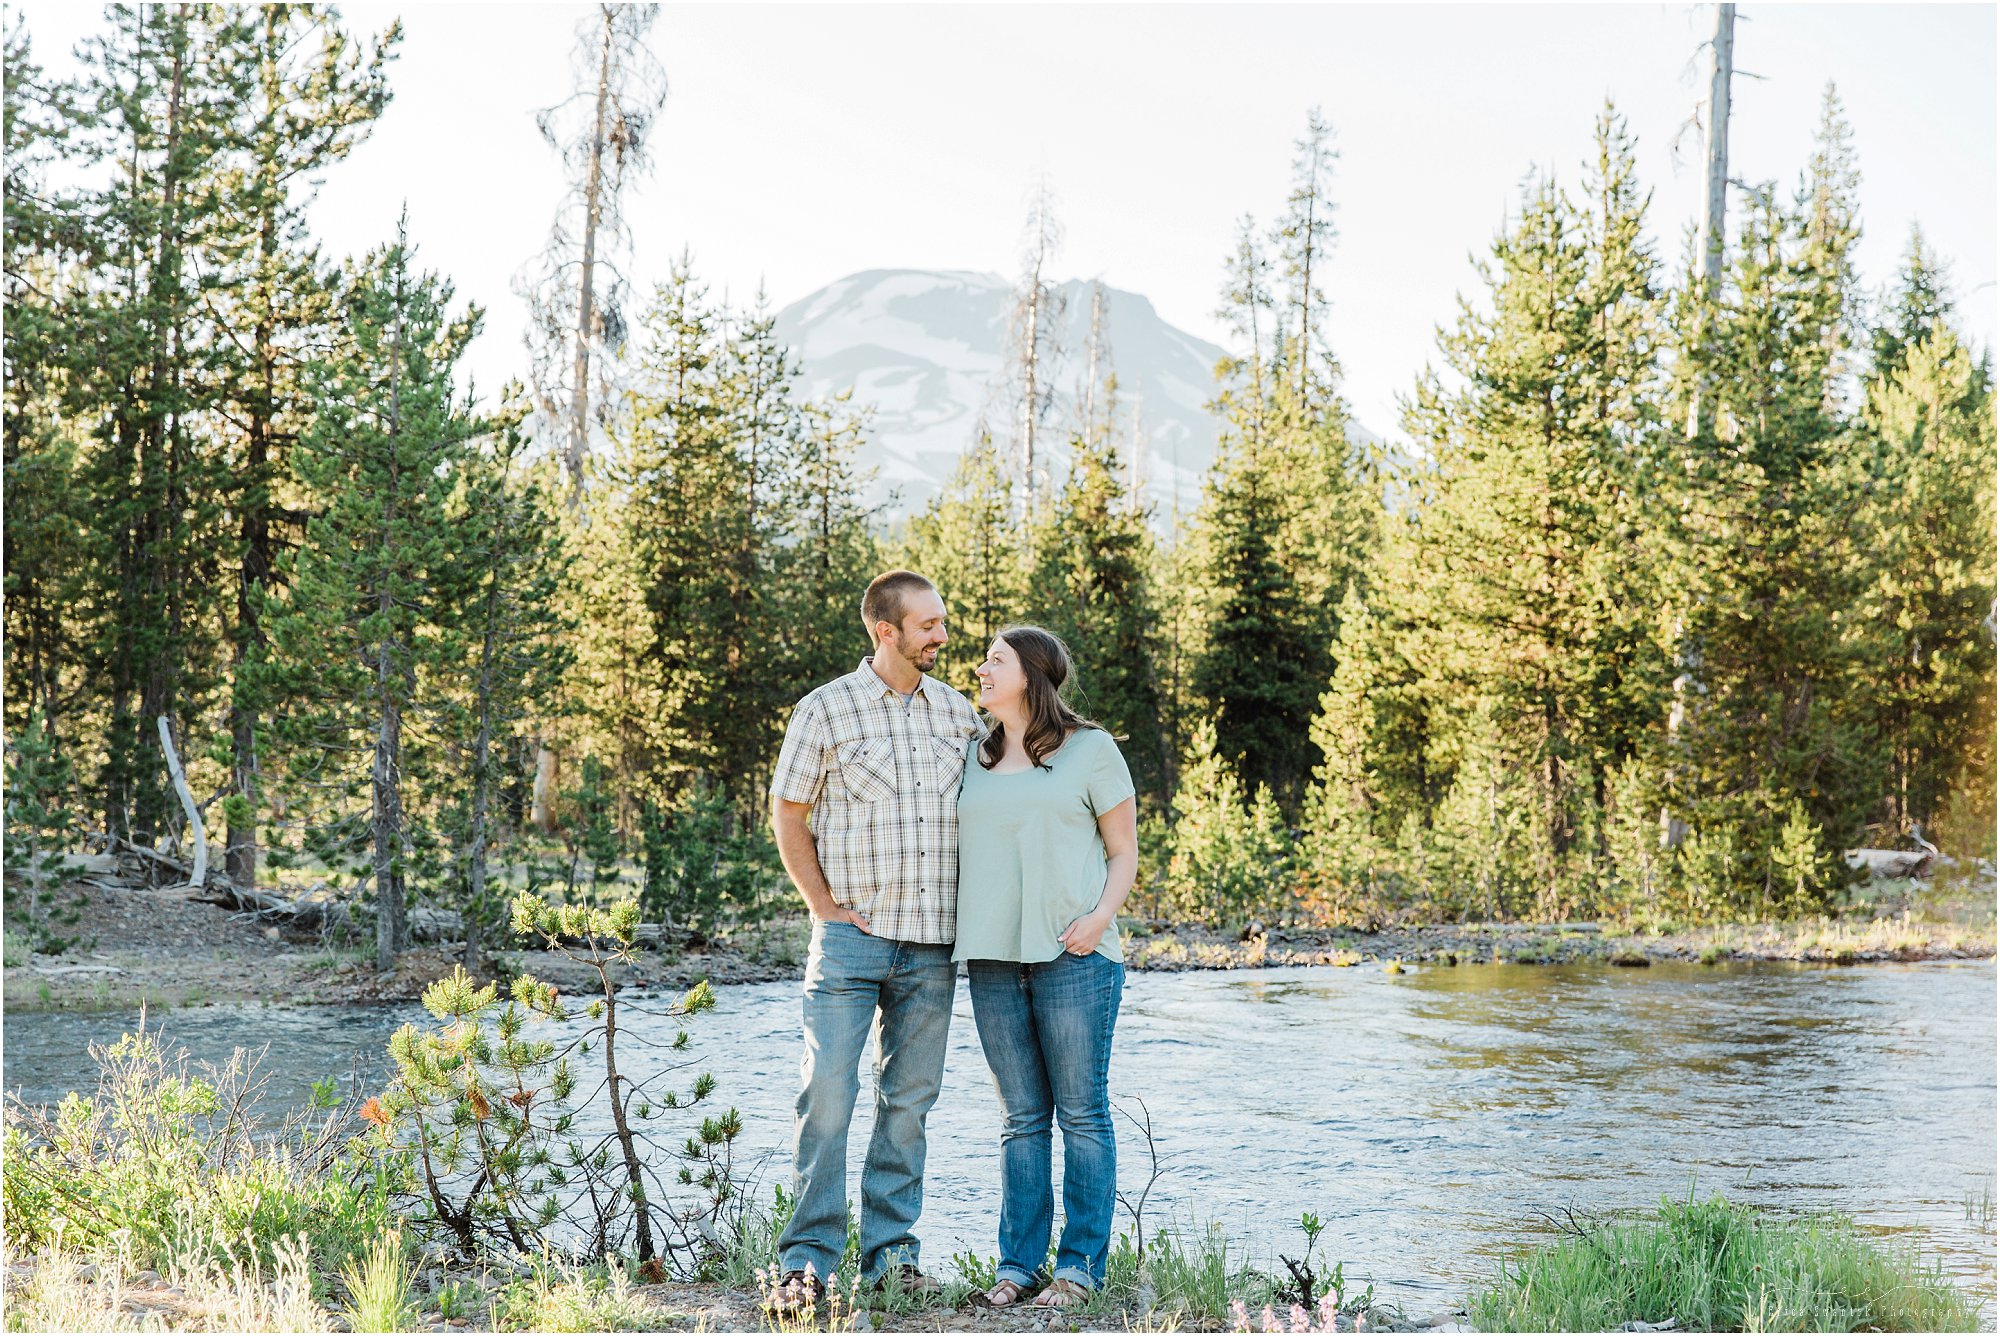 South Sister in her full glory at this Cascade Mountain engagement photography session near Bend, OR. | Erica Swantek Photography